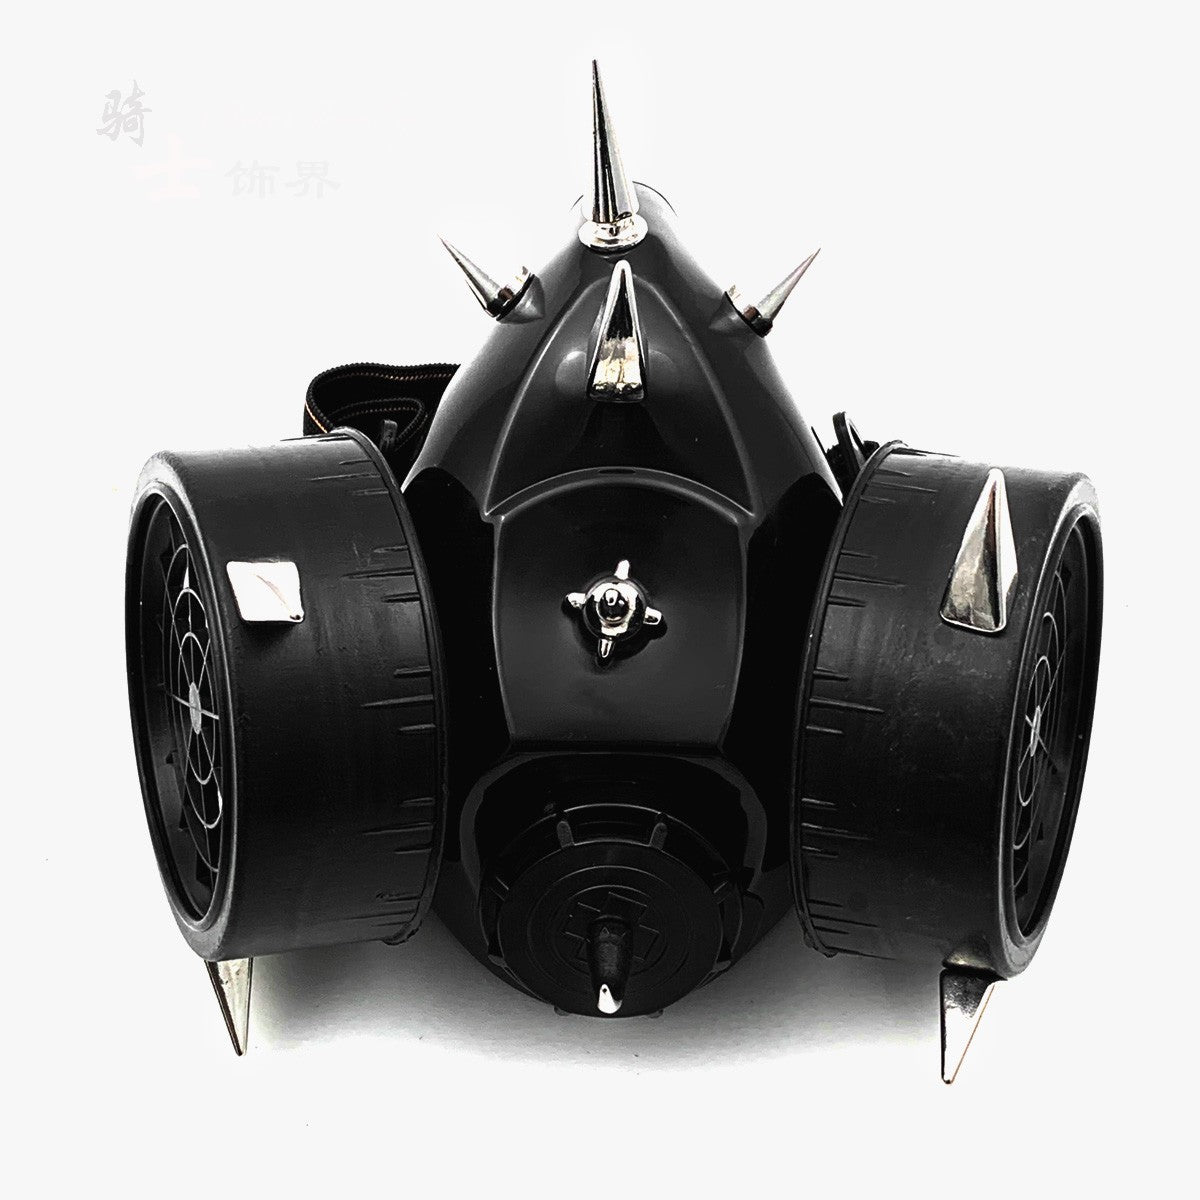 A black Steampunk cosplay mask with spikes on it. (Brand: Maramalive™)